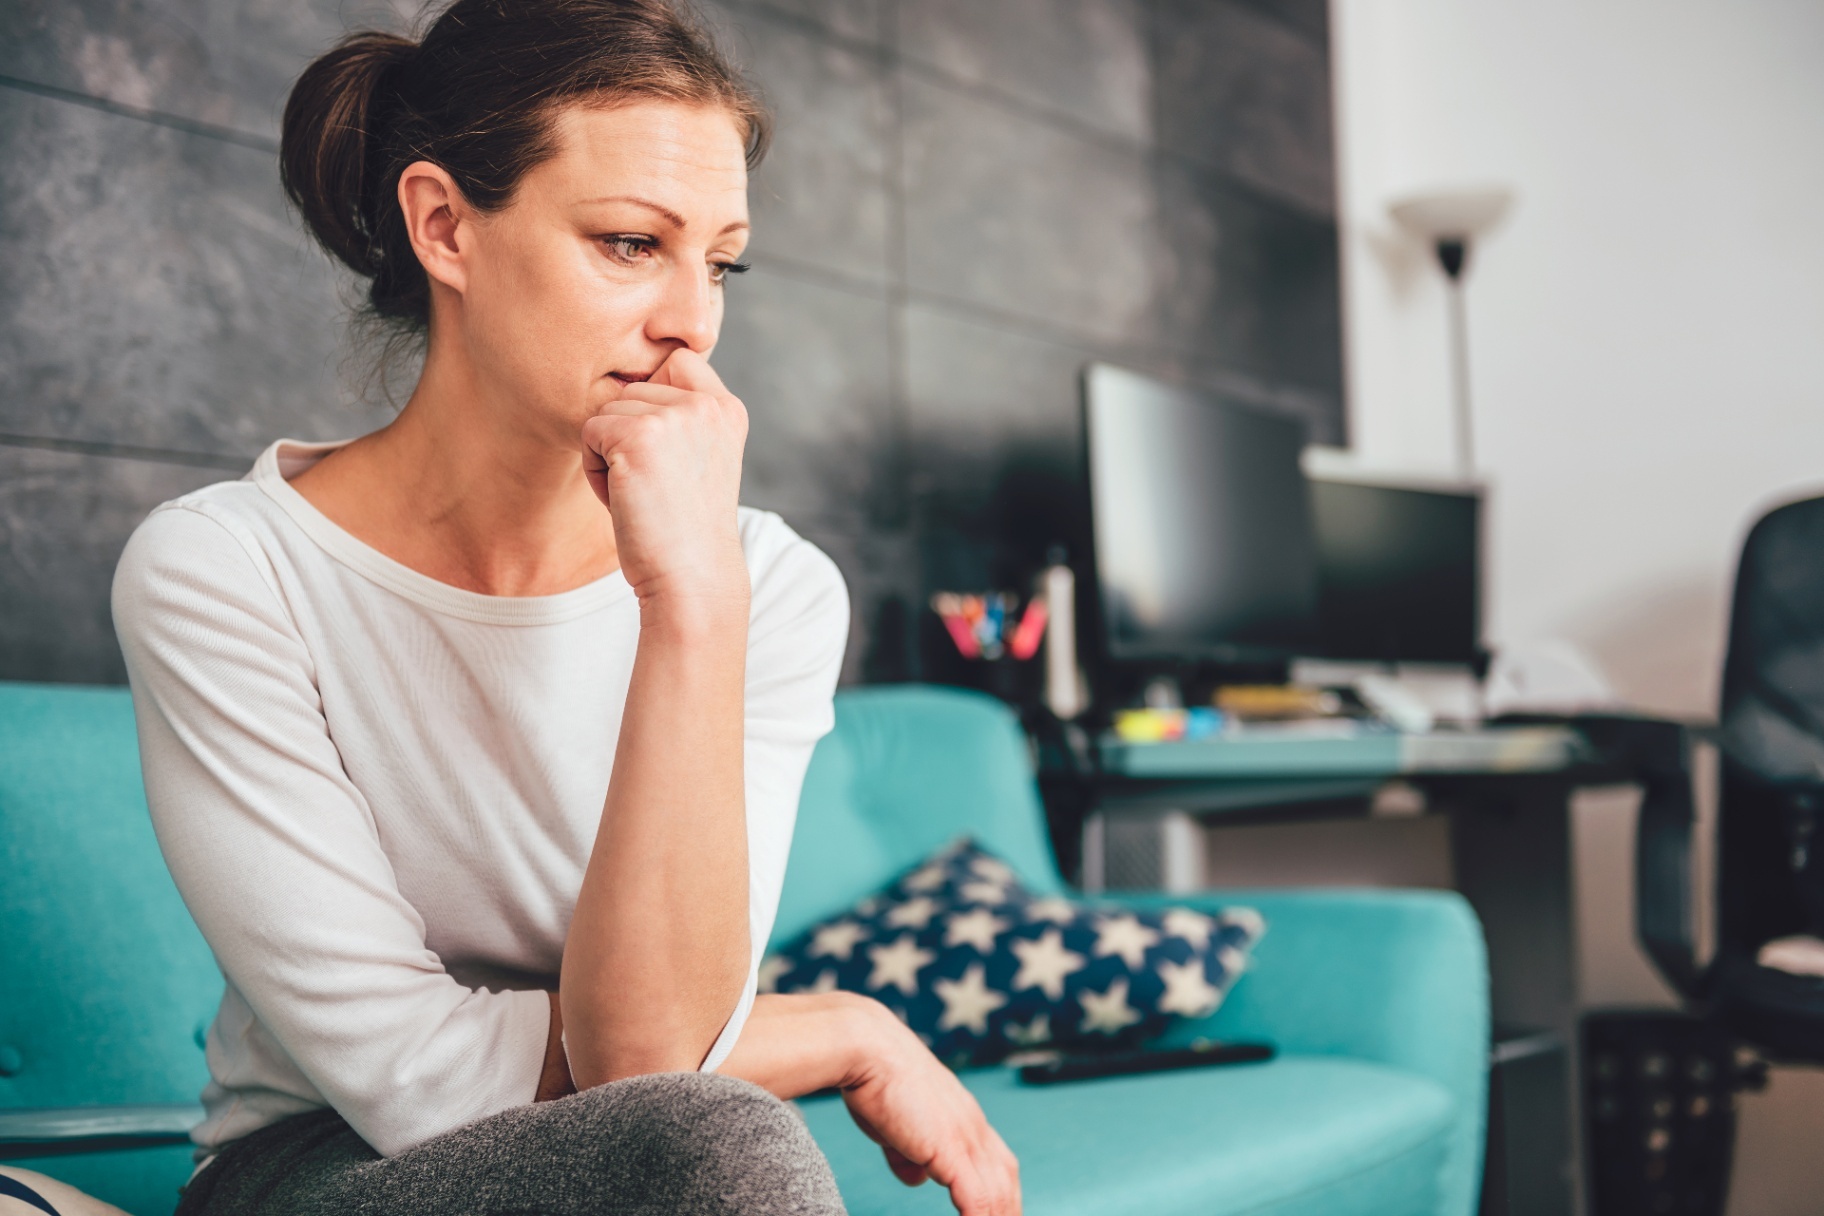 A woman sits with a sad expression. Learn how substance abuse treatment in Delray Beach, FL can offer support by contacting an addiction therapist in Palm Beach, FL.